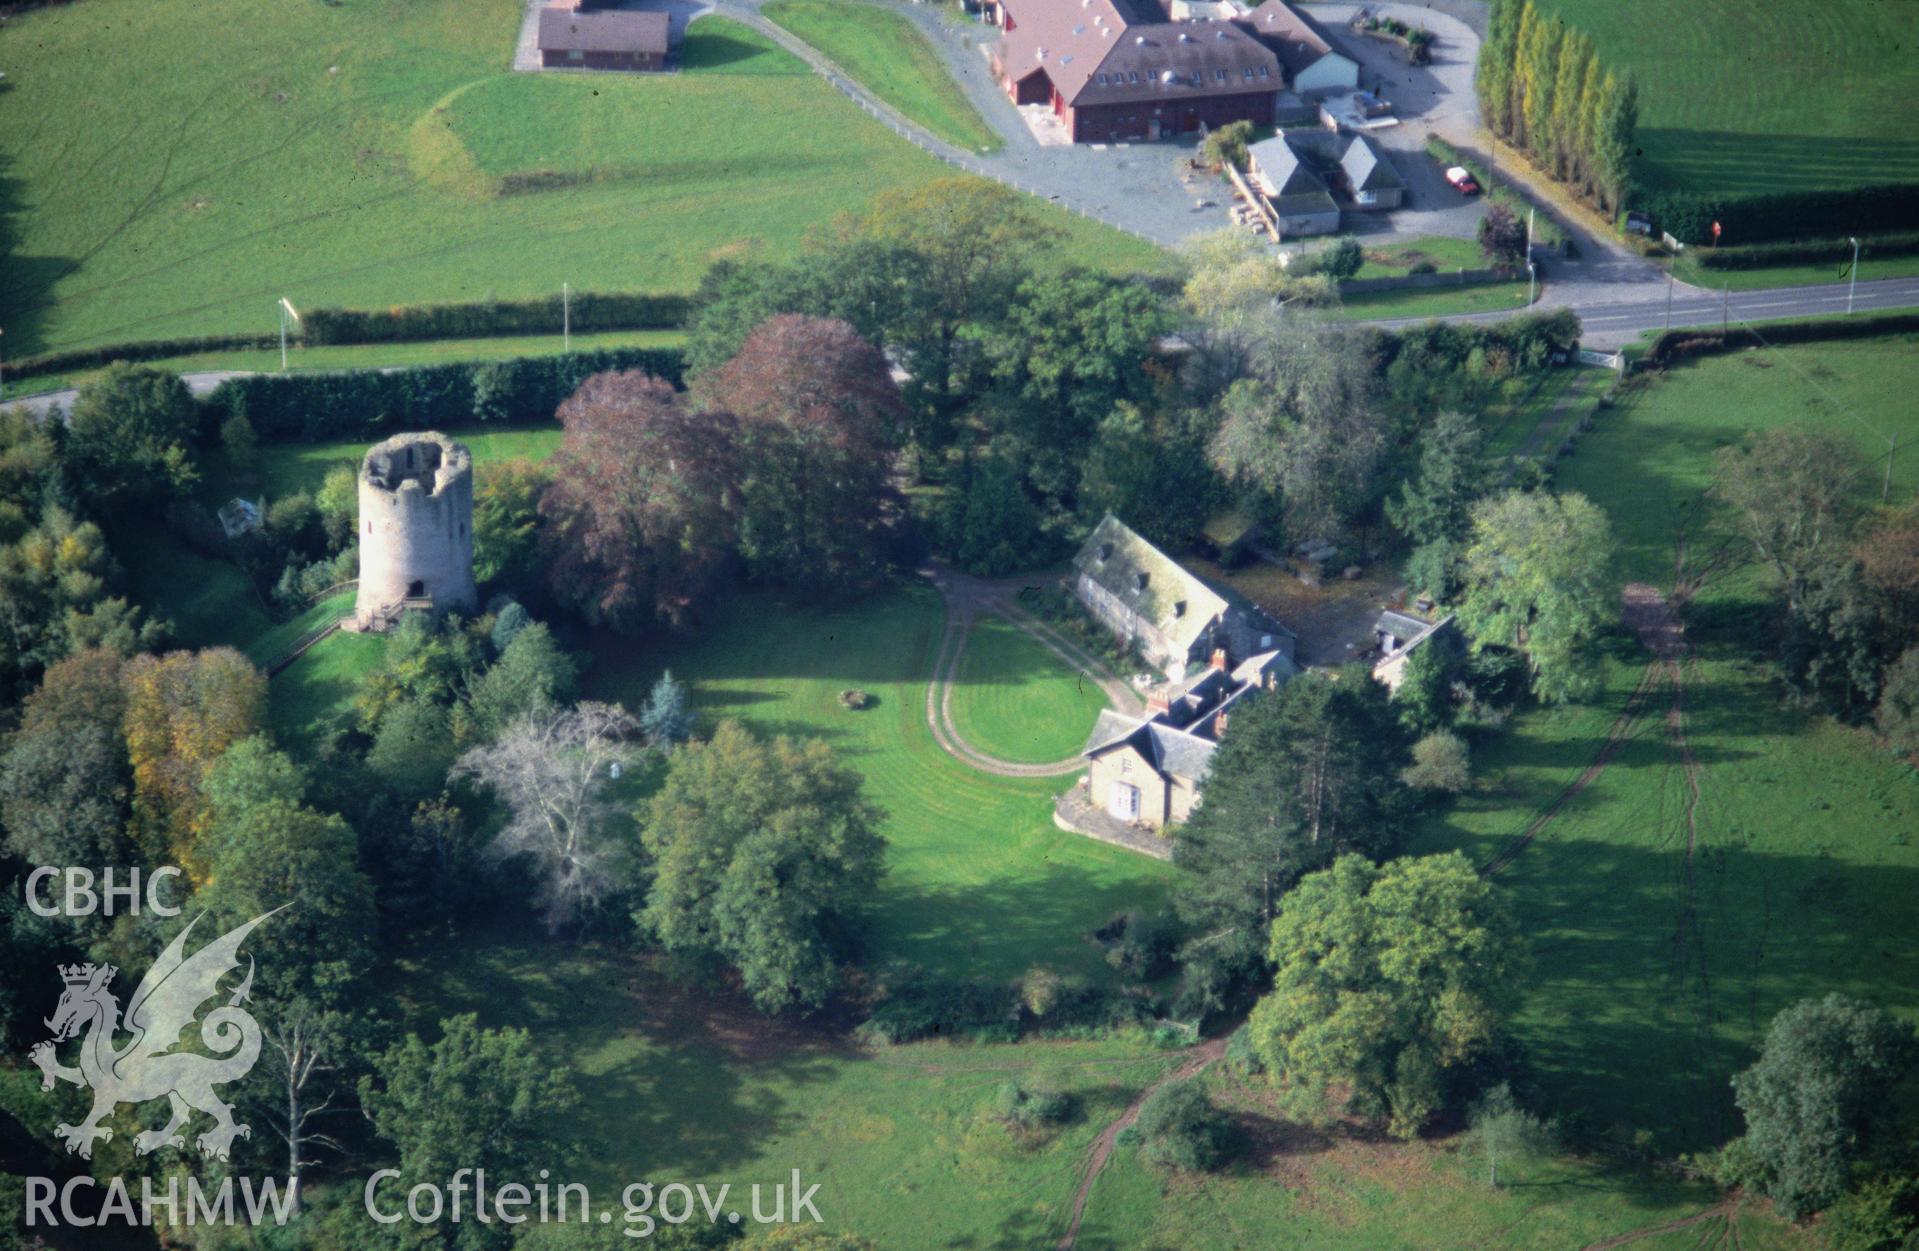 Slide of RCAHMW colour oblique aerial photograph of Bronllys Castle Tower, taken by C.R. Musson, 17/10/1992.